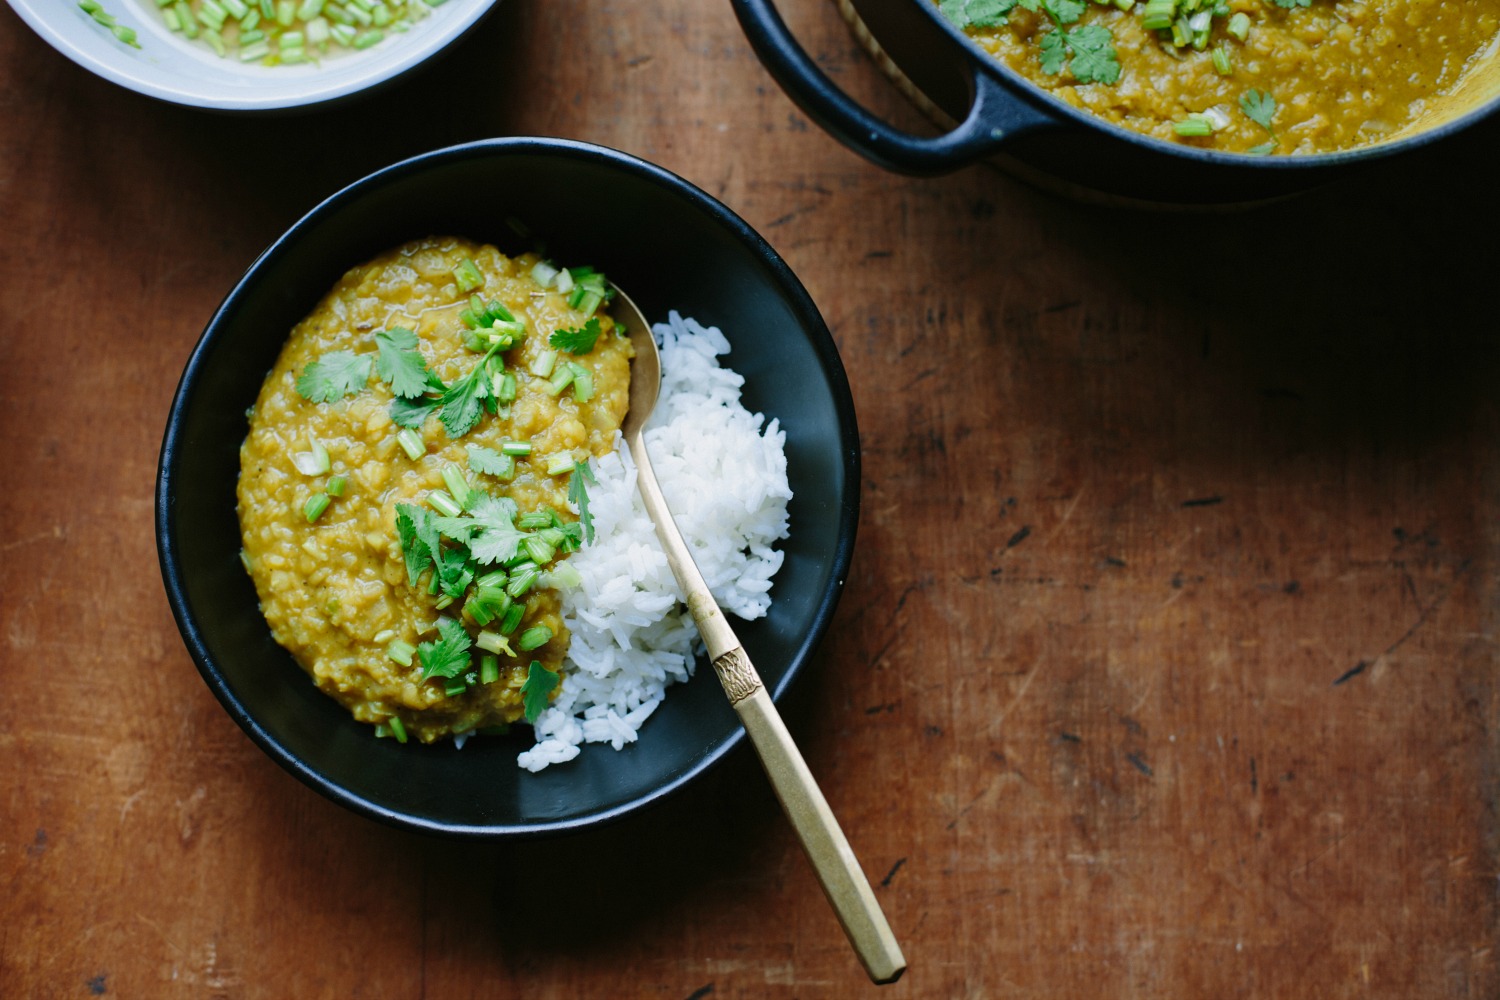 my favourite red lentil dhal with pickled coriander (cilantro) stalks